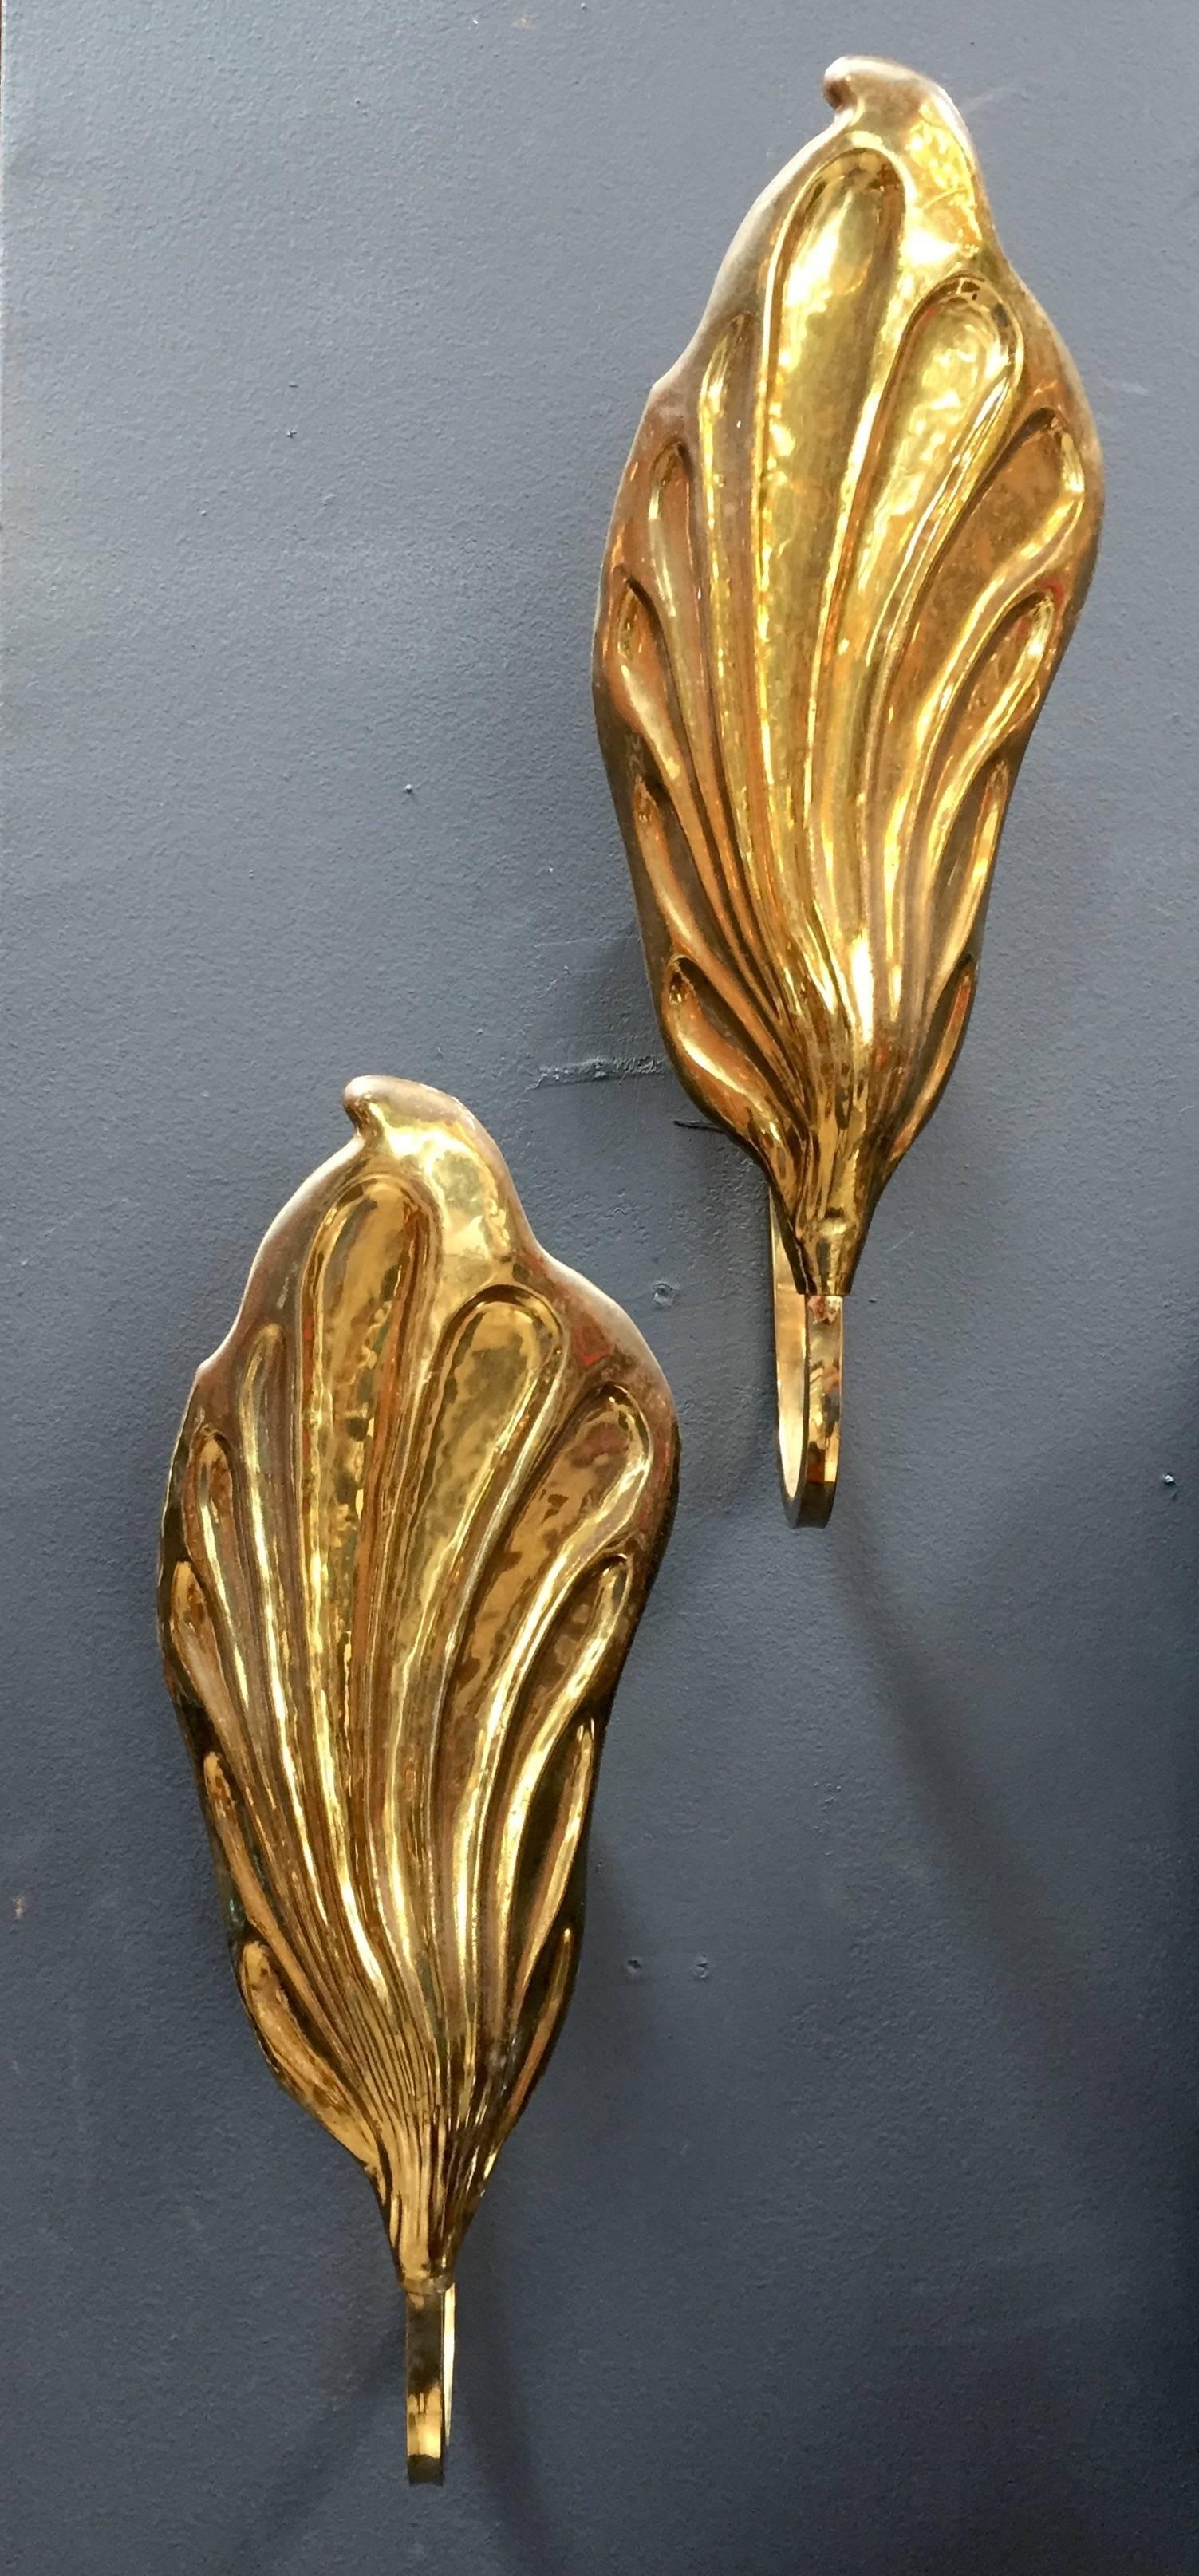 A pair of Tommaso Barbi wall lights in brass in the shape of leave. Italy, 1970s. Italian designer Tommaso Barbi is best known for whimsical furniture featuring organic forms, particularly brass leaf-shaped lamps.
AD 